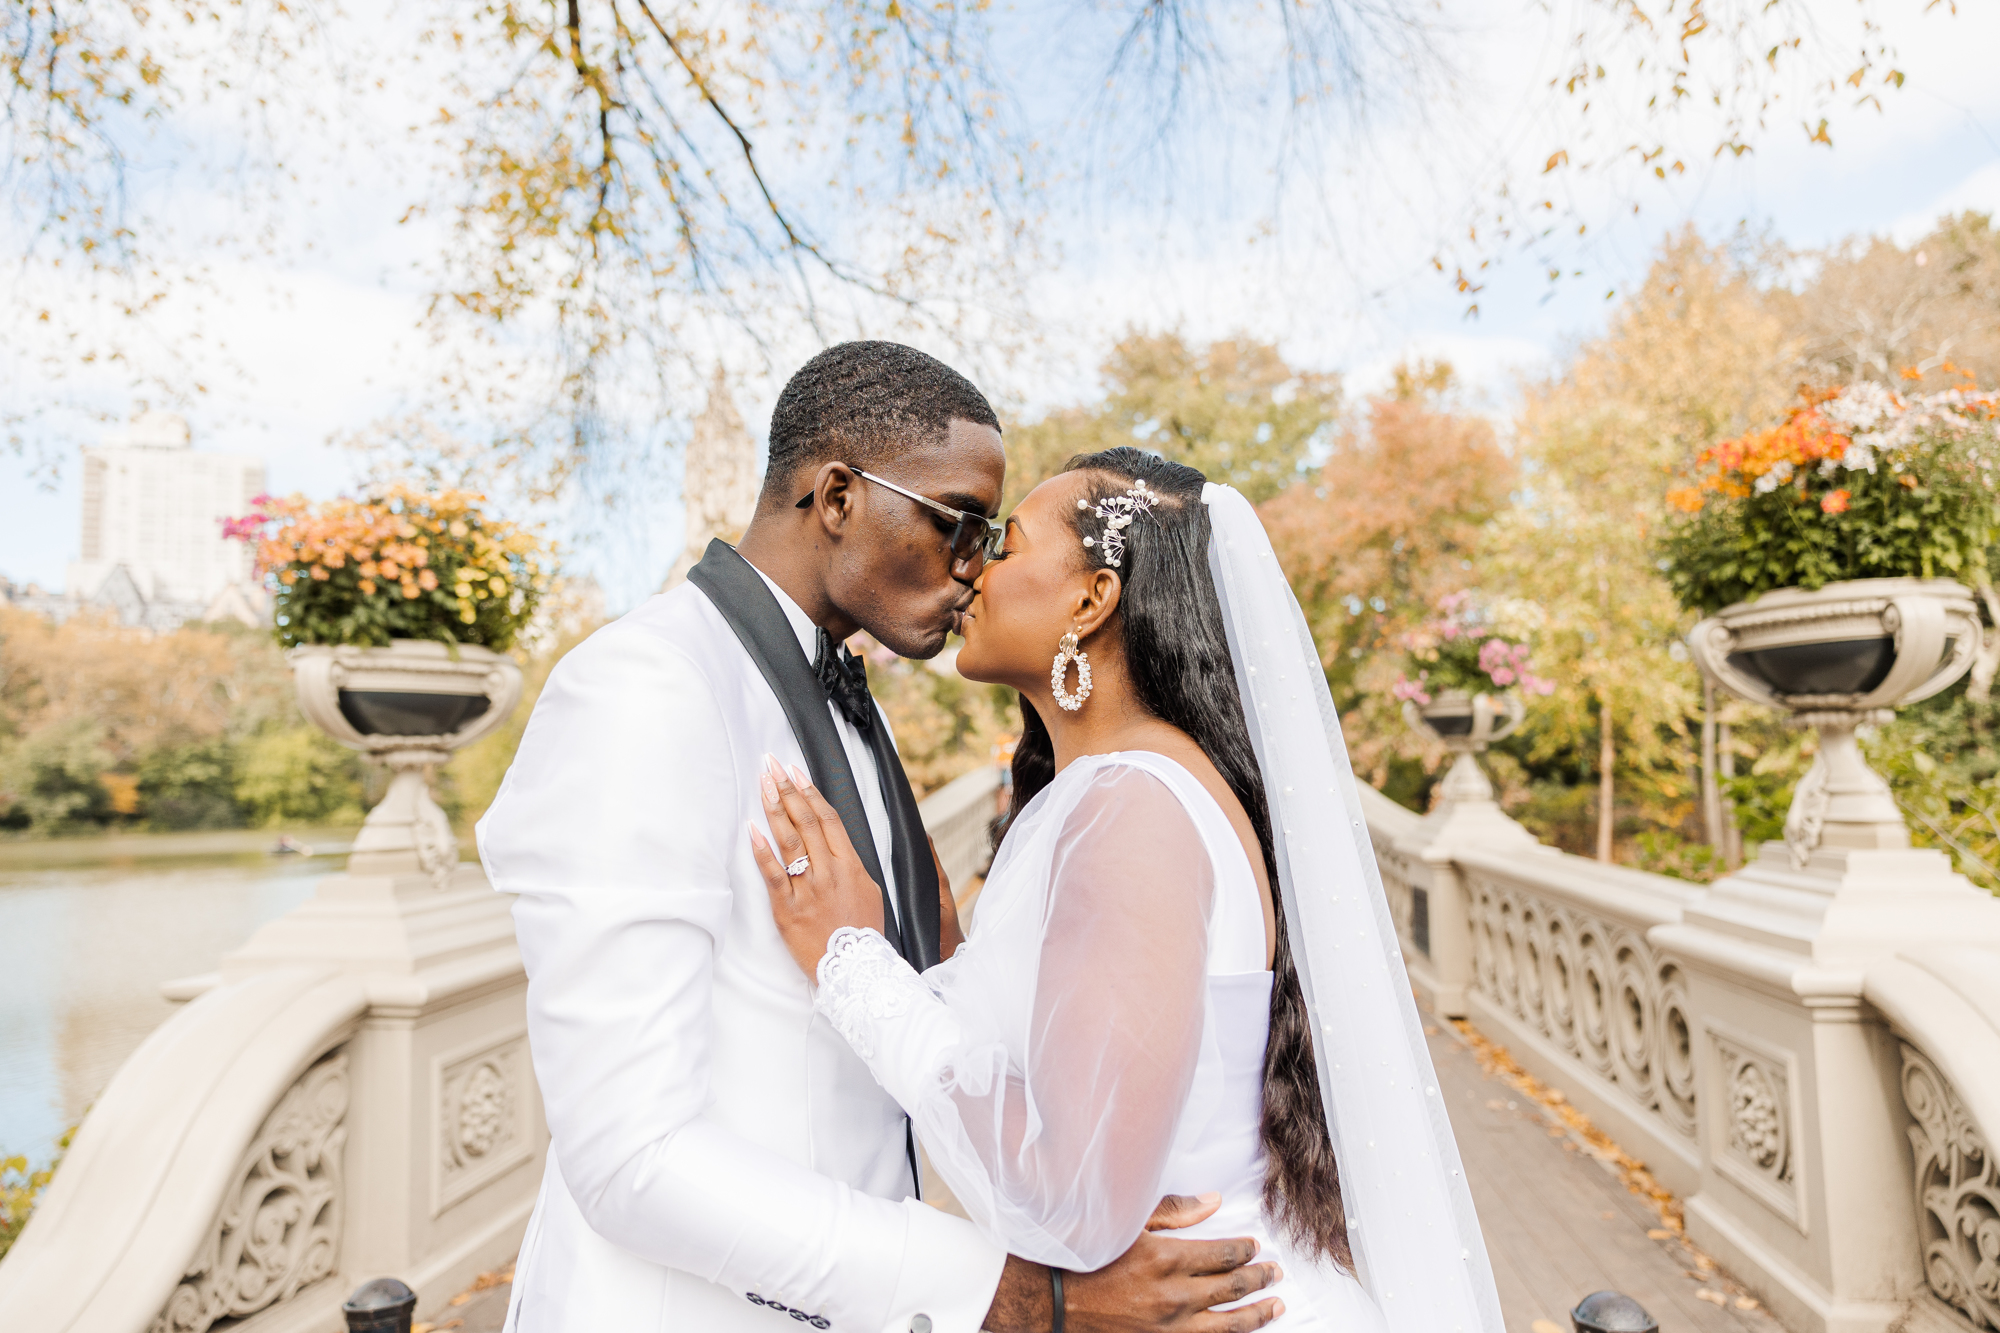 Colorful Central Park Wedding Photos on Cherry Hill in Fall